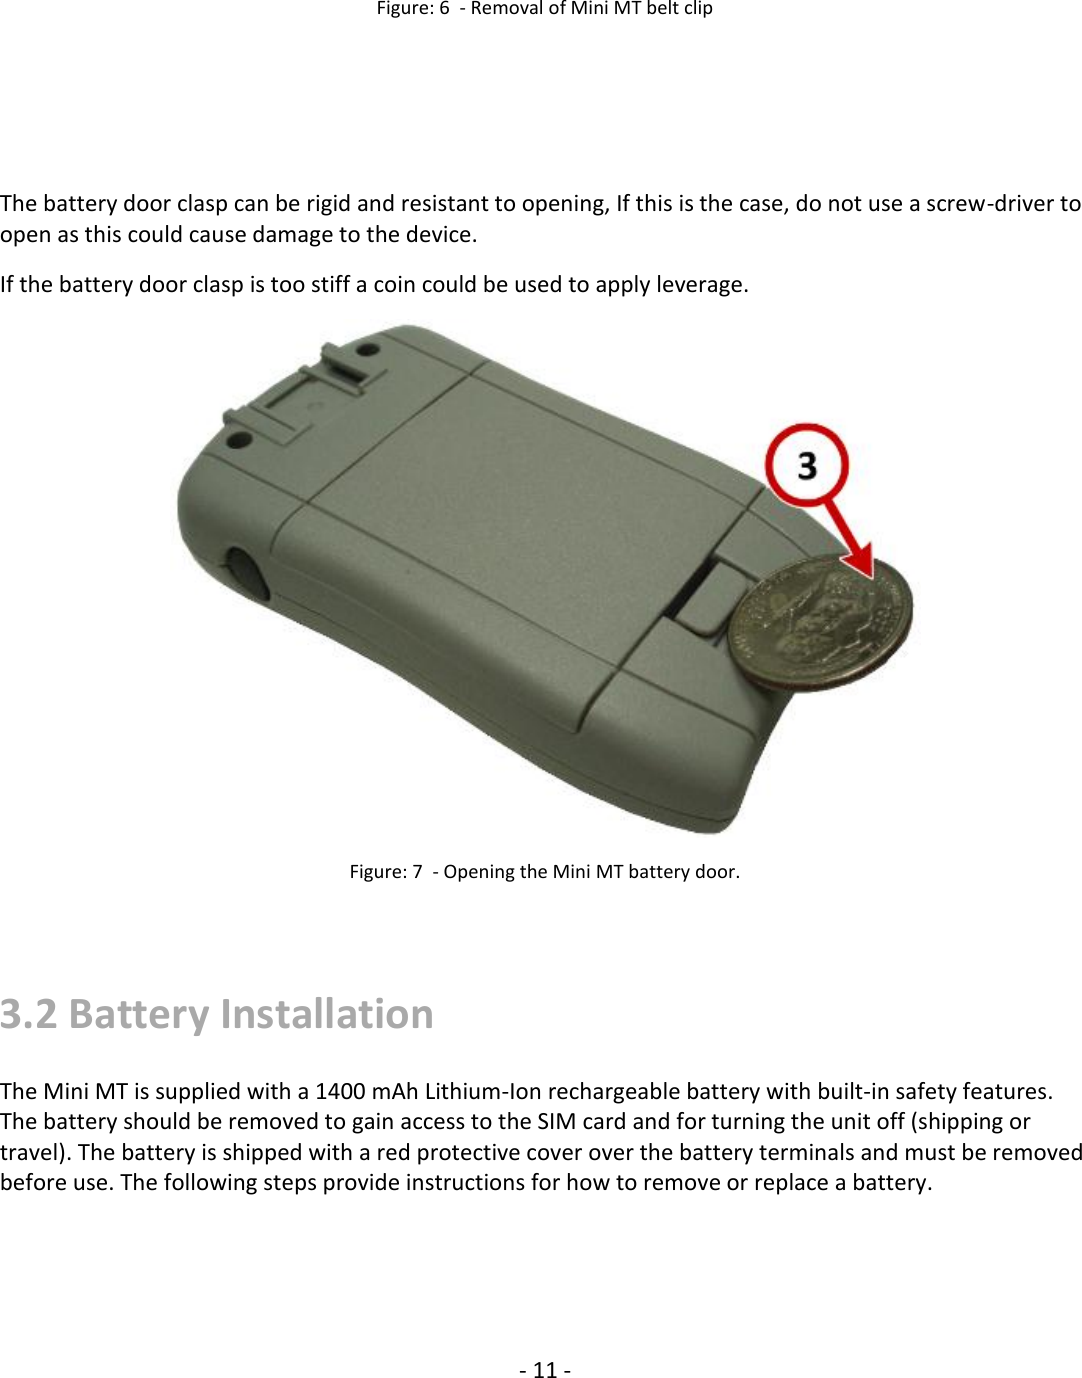   - 11 - Figure: 6  - Removal of Mini MT belt clip       The battery door clasp can be rigid and resistant to opening, If this is the case, do not use a screw-driver to open as this could cause damage to the device.  If the battery door clasp is too stiff a coin could be used to apply leverage.  Figure: 7  - Opening the Mini MT battery door.   3.2 Battery Installation The Mini MT is supplied with a 1400 mAh Lithium-Ion rechargeable battery with built-in safety features. The battery should be removed to gain access to the SIM card and for turning the unit off (shipping or travel). The battery is shipped with a red protective cover over the battery terminals and must be removed before use. The following steps provide instructions for how to remove or replace a battery.   